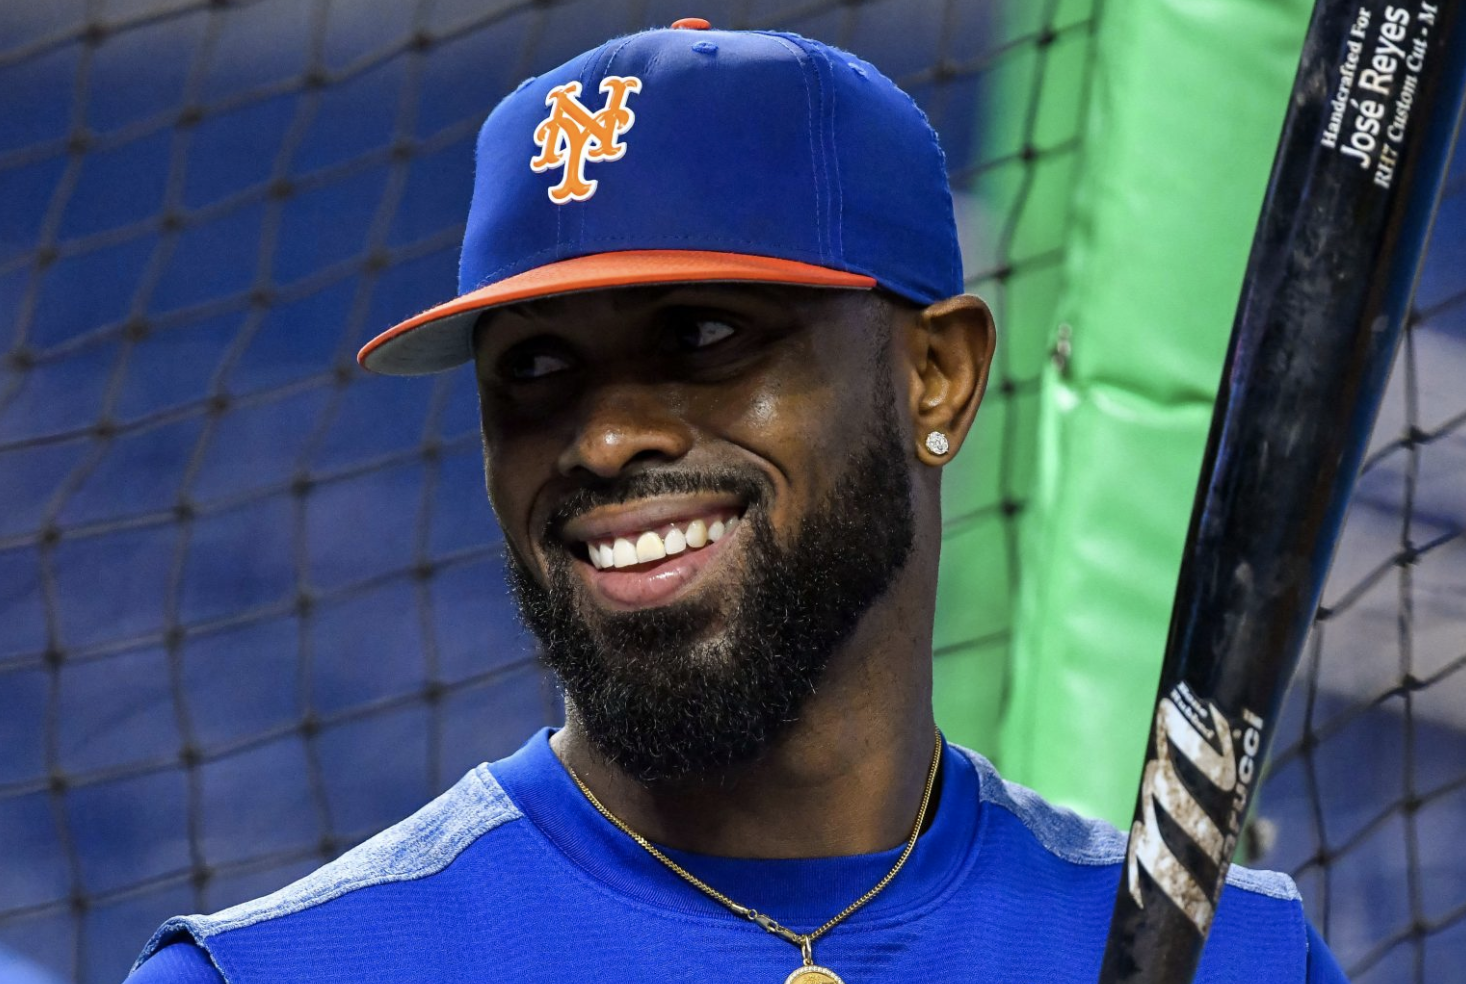 Jose Reyes announces retirement from MLB after 16 seasons